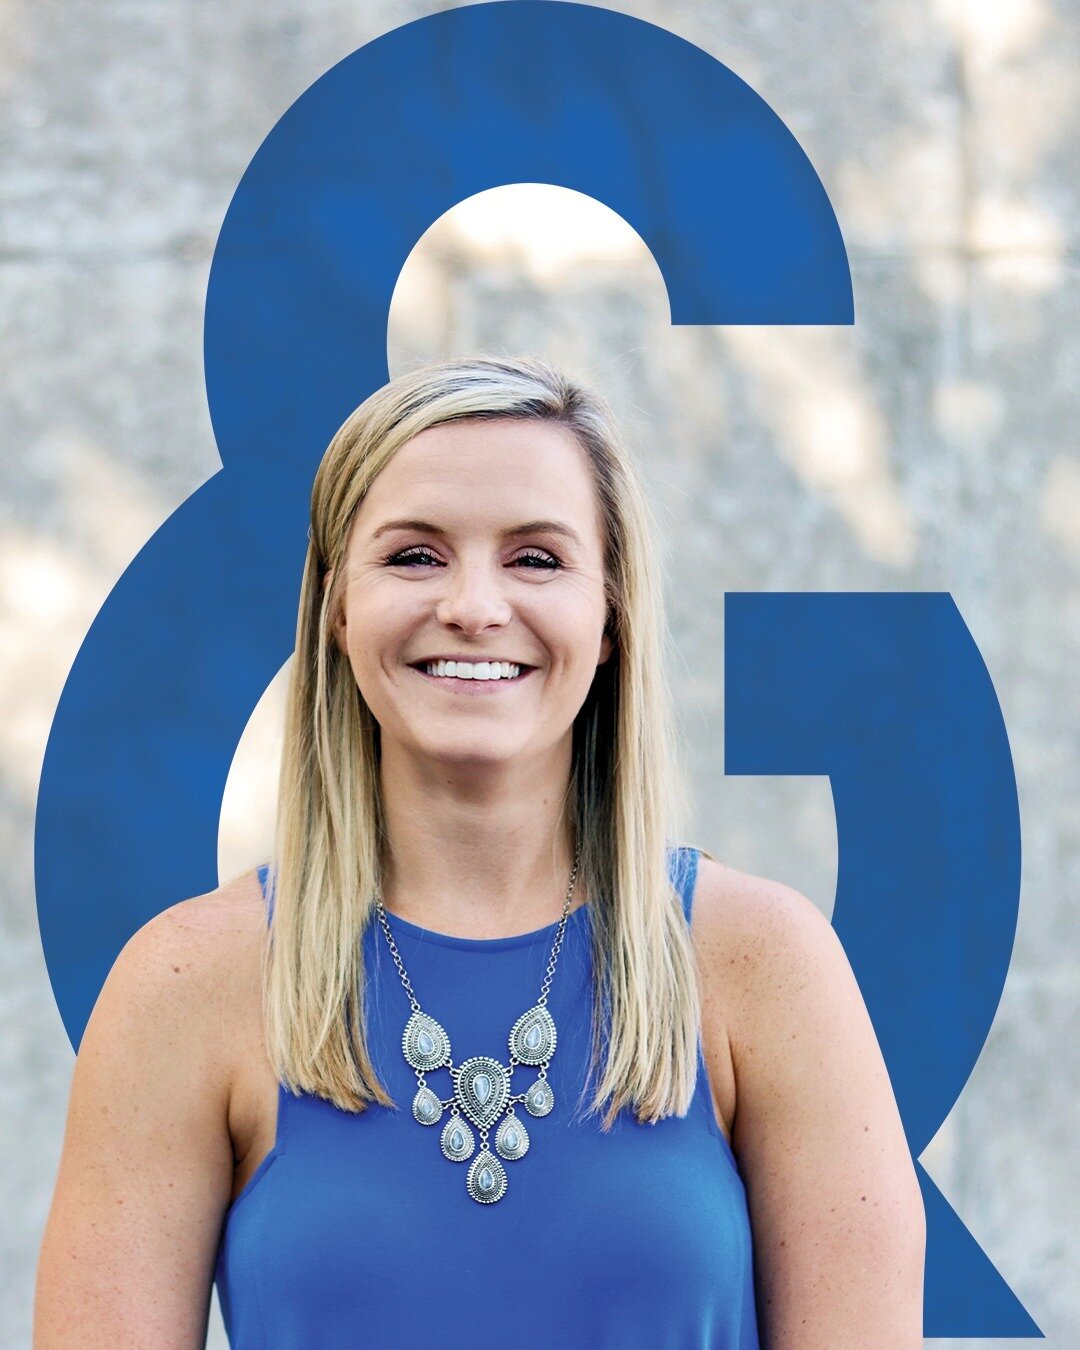 The magic number is 6 (years) for Cierra! Happy work-a-versary🥳 Let's get to know a lil about her... and her dog... and her adorable baby:

-When I retire: I want to pass along everything I&rsquo;ve learned to younger generations and make peoples da